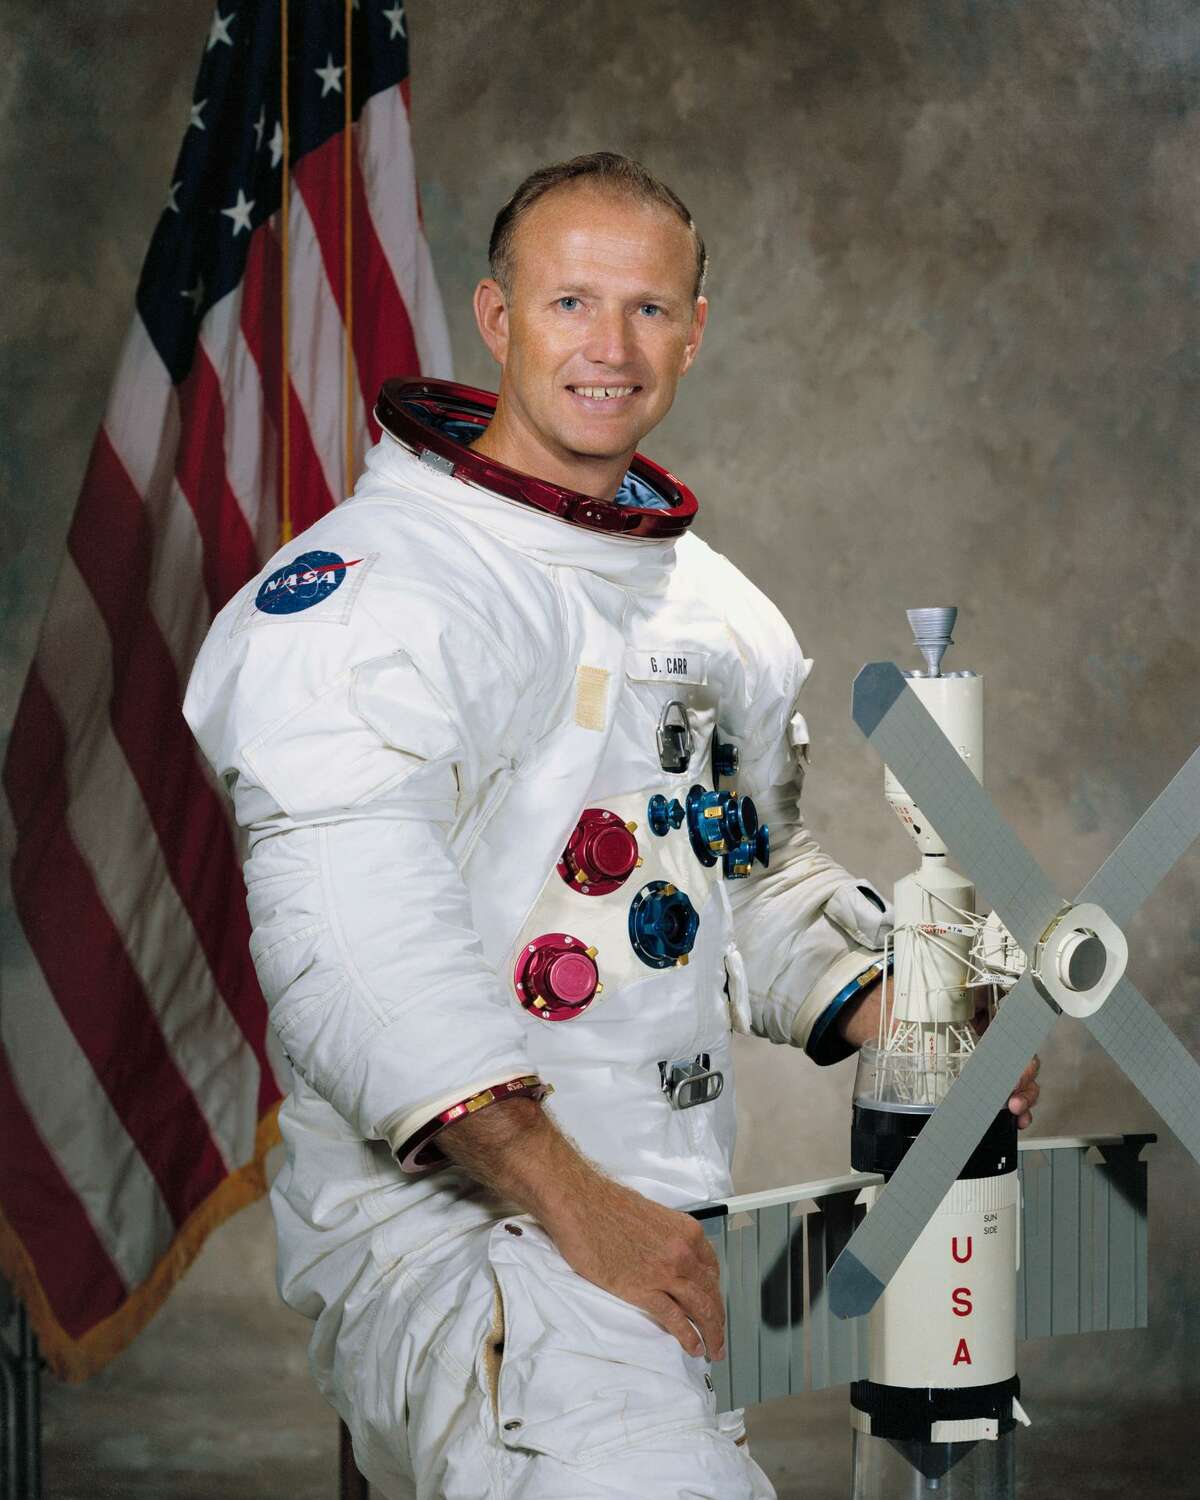 Astronaut Gerald "Jerry" P. Carr in his spacesuit in 1971. Jerry is one of the main subjects of the upcoming documentary "The Artist and the Astronaut." (Courtesy of NASA)